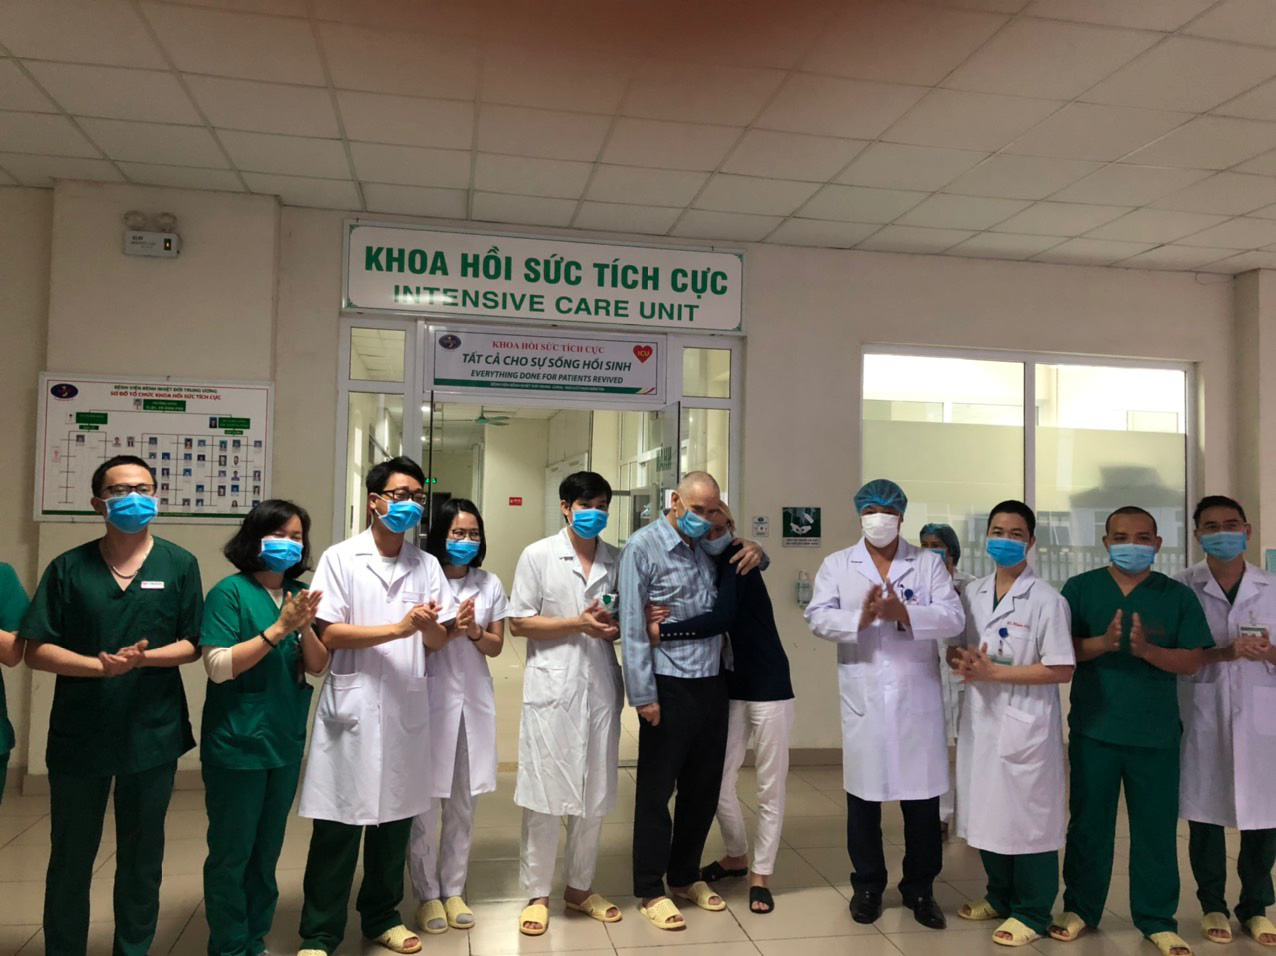 74-yo Briton recovers from critical condition after COVID-19 treatment in Hanoi